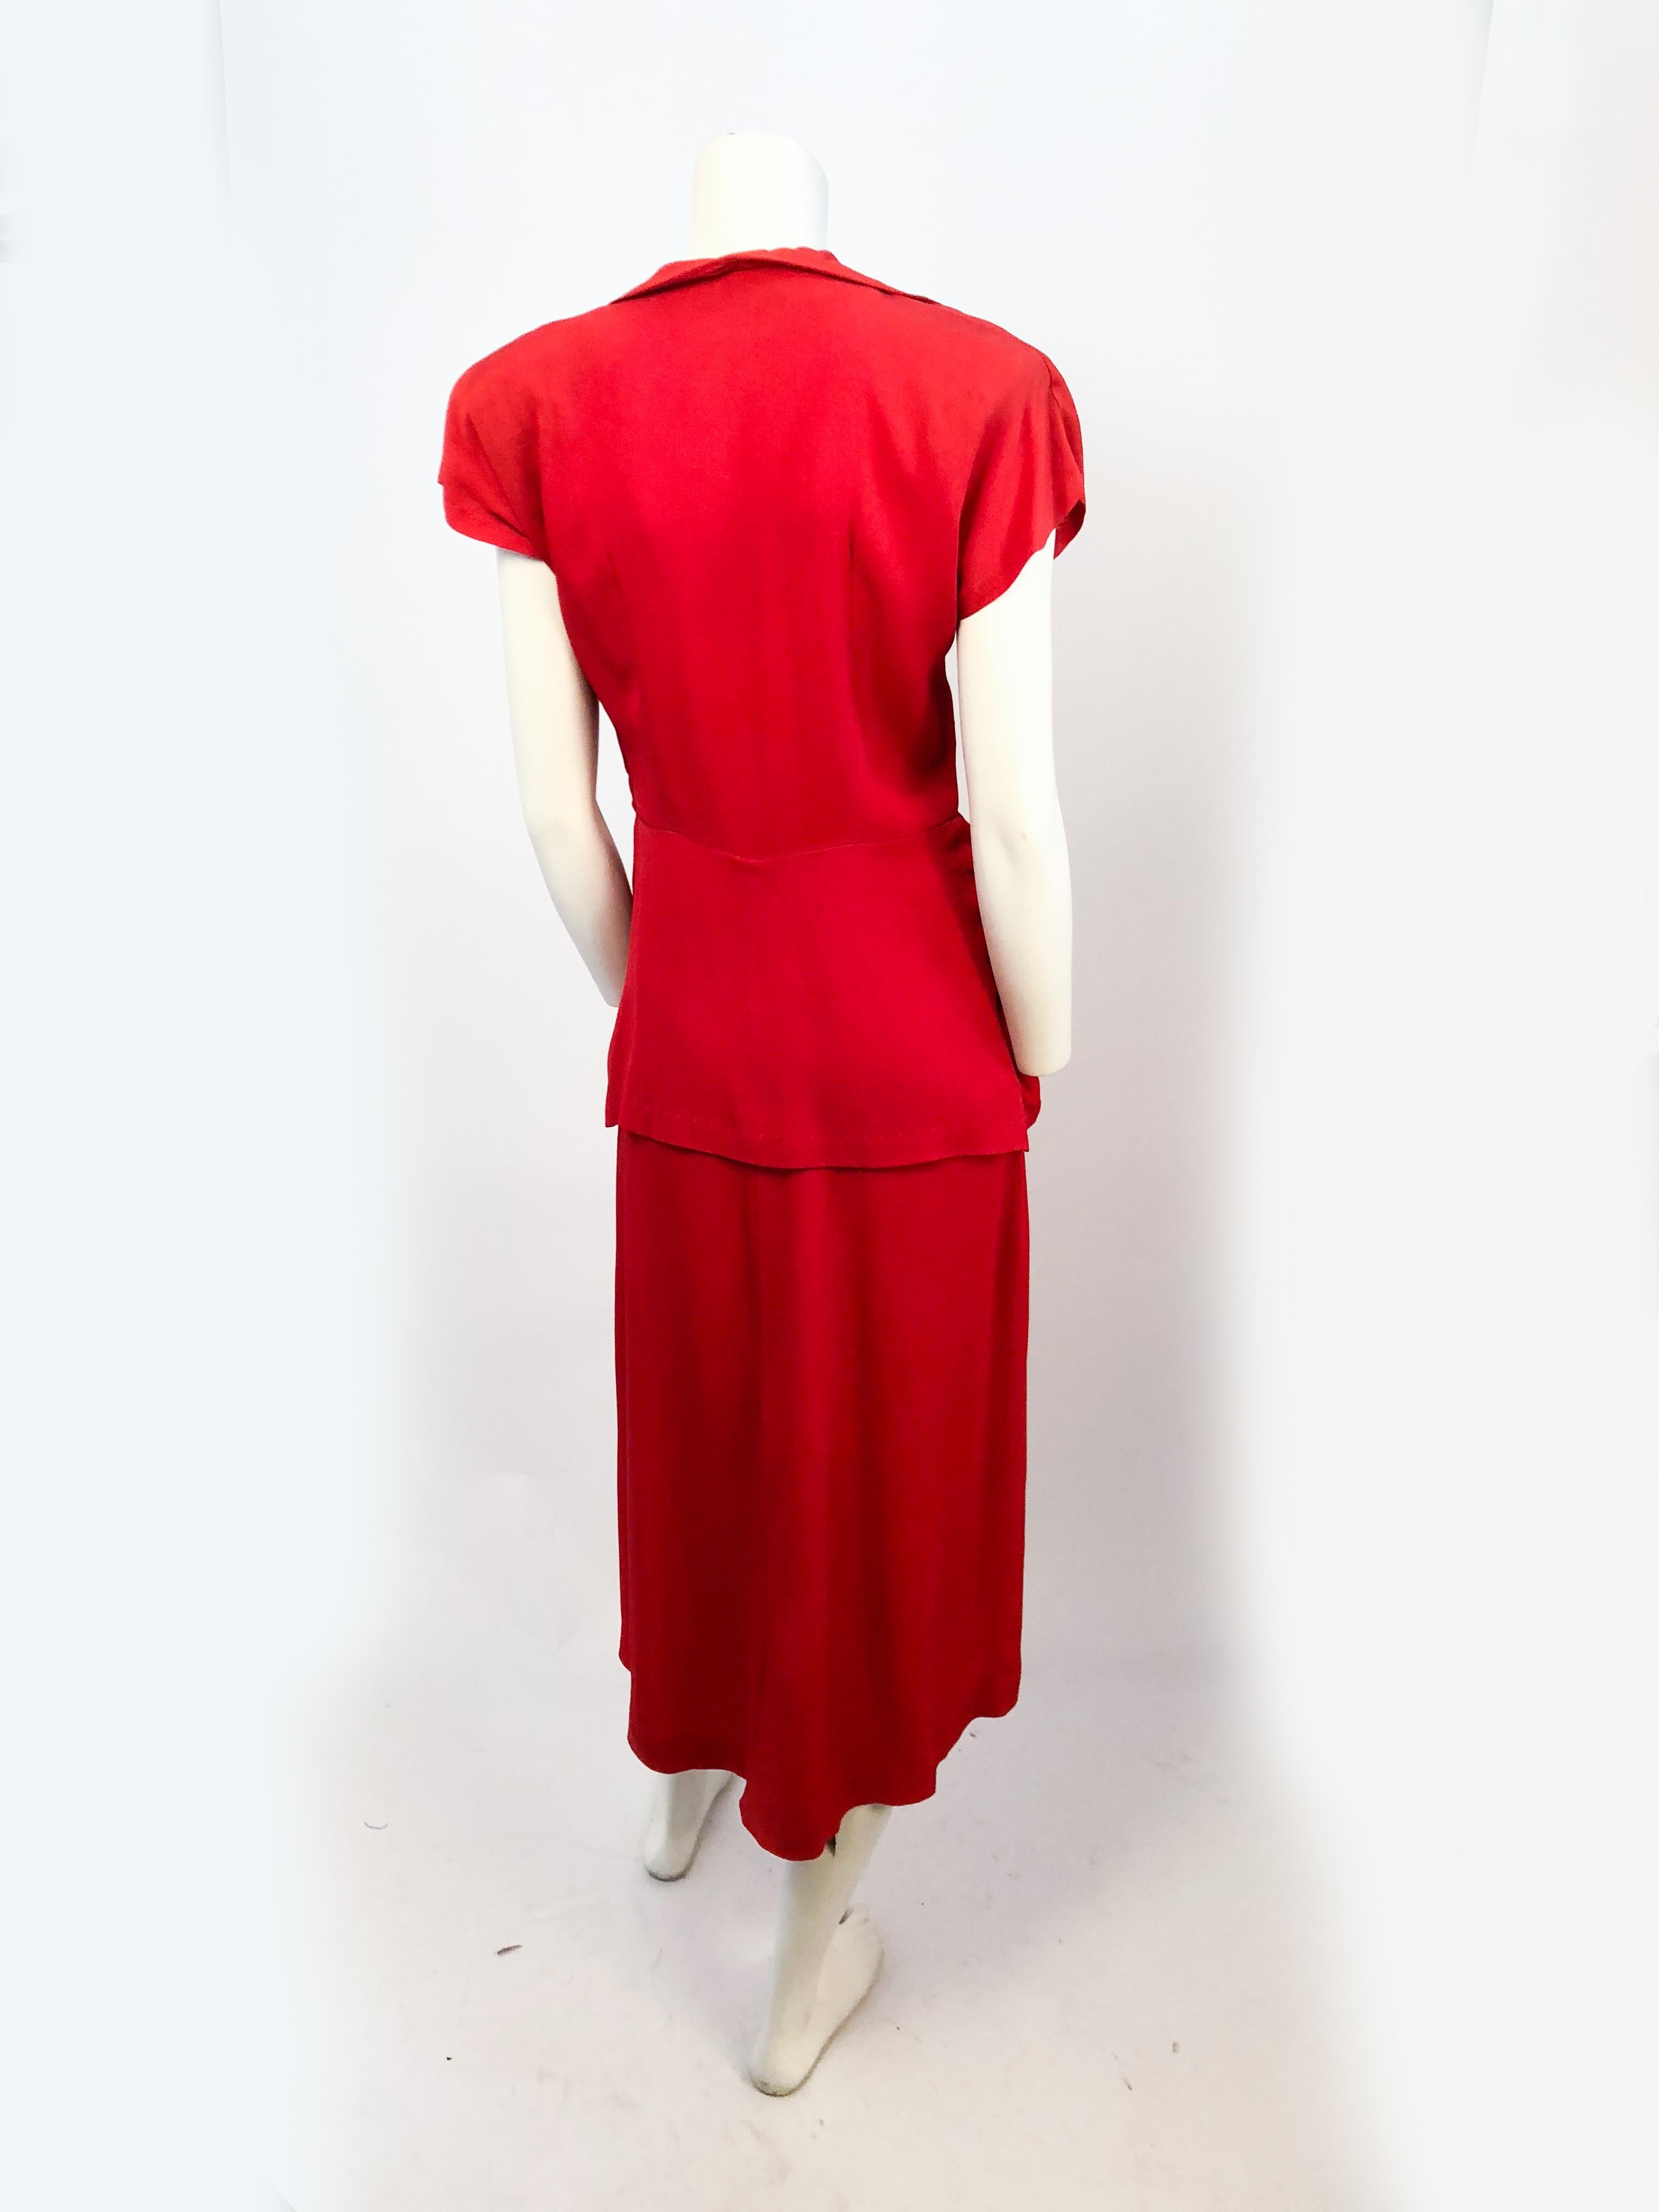 1940s Red Crepe Dress with Stud and Rhinestone Accents. Also features padded shoulders, full peplum, and covered buttons.